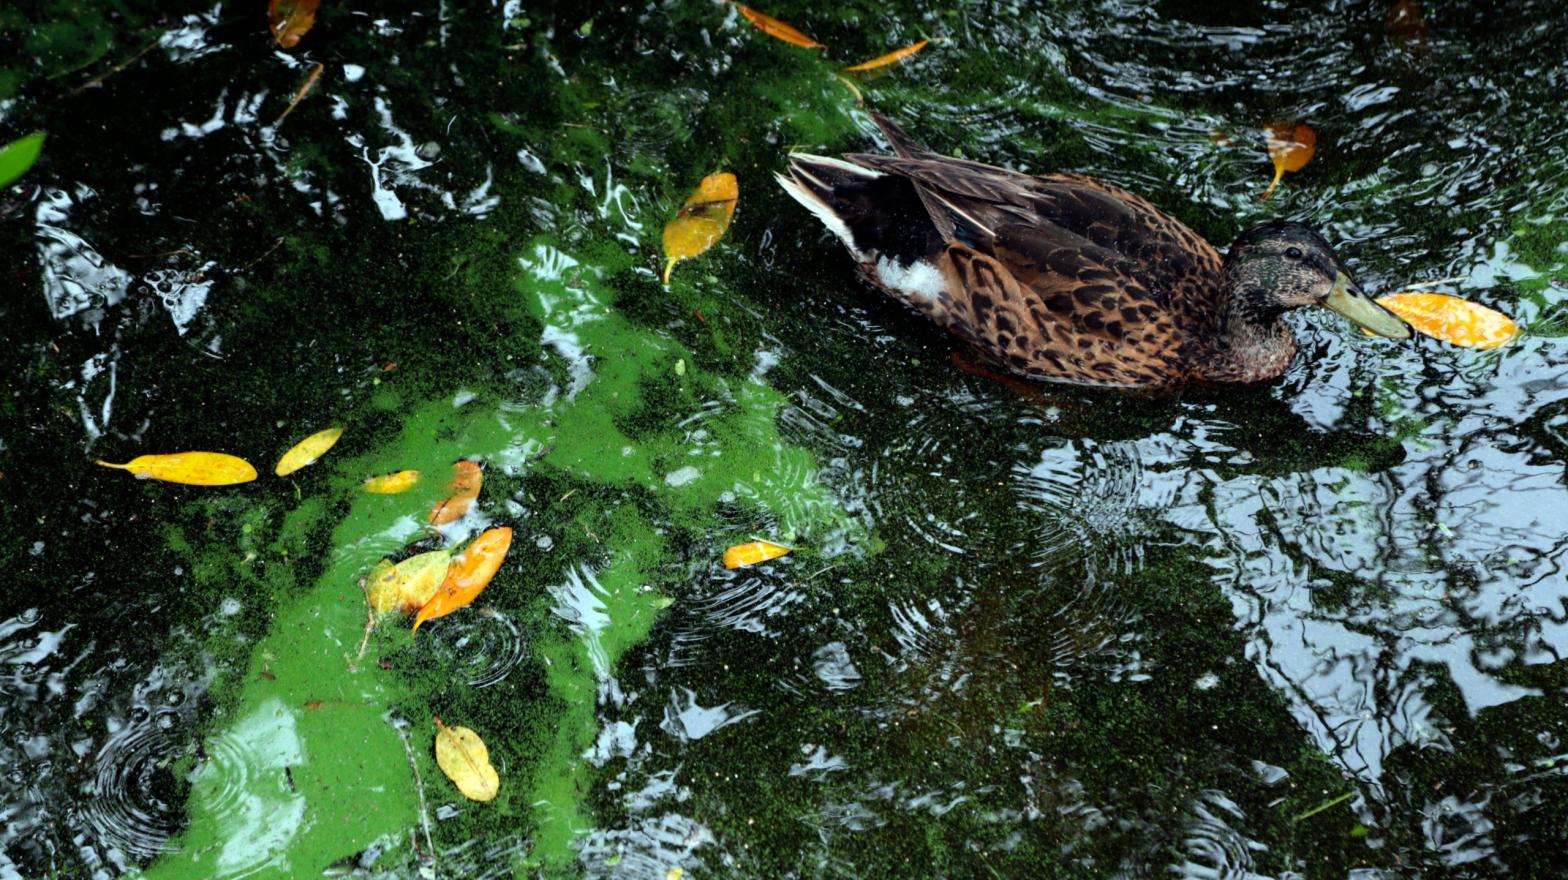 A duck floating past an algae bloom that occurred in July 2018 in the Caloosahatchee River, near Fort Myers, Florida (Photo: Lynne Sladky, AP)